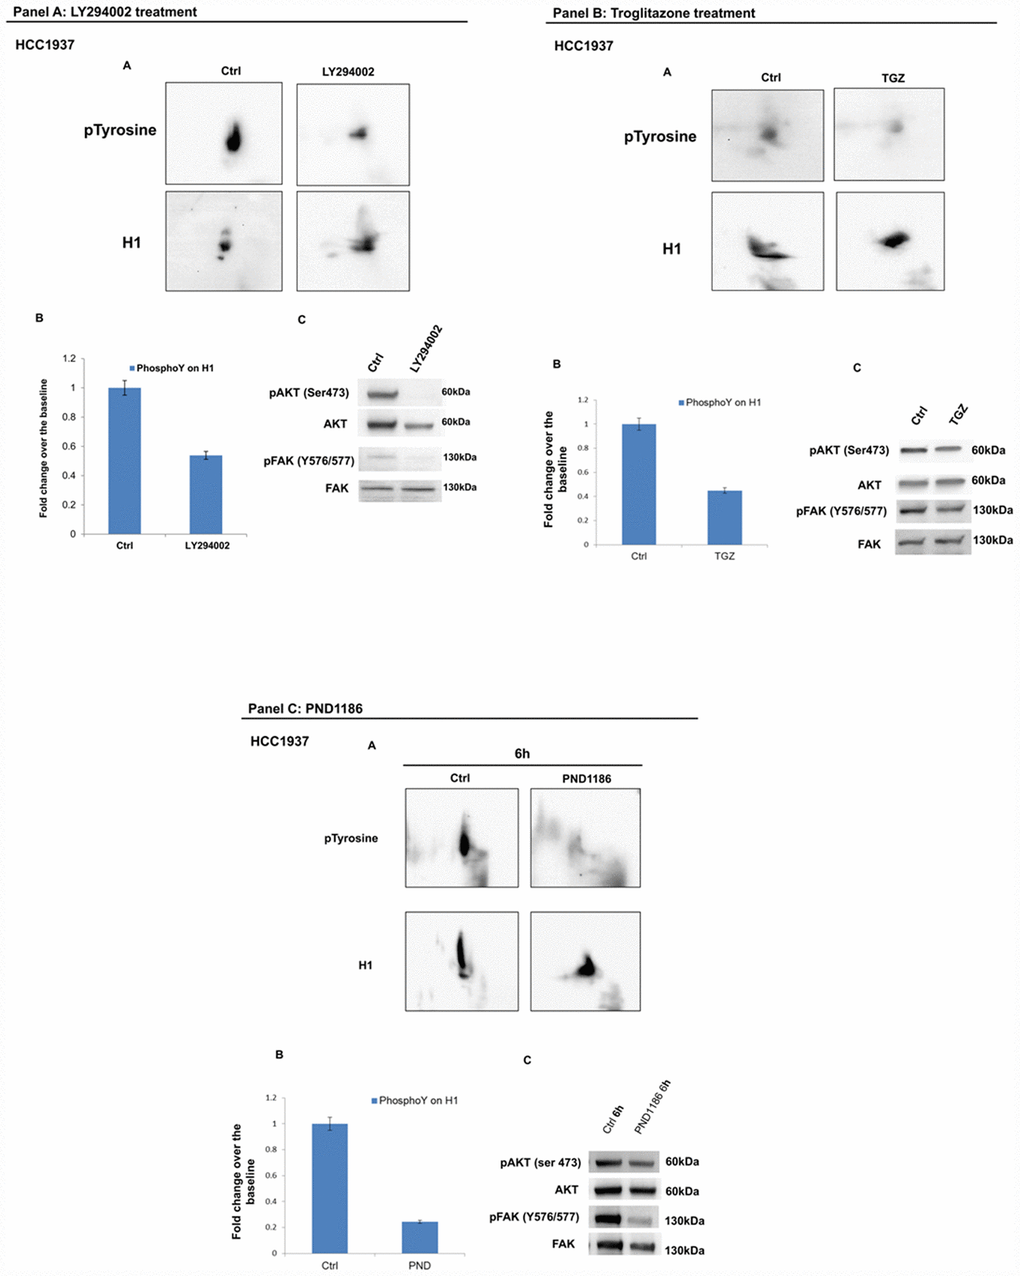 Analysis of H1 histone tyrosine phosphorylation following LY294002, Troglitazone and PND1186 treatments in HCC1937 cells. (Panel A) Analysis of H1 histone tyrosine phosphorylation following LY294002 treatments in HCC1937 cells. (A) 2D TAU Western blot analysis of histone H1 tyrosine phosphorylation level (upper panel) and relative normalization with H1 antibody (lower panel) after treatment of HCC1937 with LY294002; All WB 2D images were acquired in 4 seconds. (B) Densitometry analysis of H1 tyrosine phosphorylation spots; (C) Western blot analysis of pAKT, and pFAK (Y576/577) levels in protein extracts from LY294002 treated cells. Phospho-Akt (ser473) and pFAK (Y576/577) signals were normalized to the corresponding total Akt and total FAK respectively. (Panel B) Analysis of H1 histone tyrosine phosphorylation following Troglitazone treatments in HCC1937 cells. (A) 2D TAU Western blot analysis of histone H1 tyrosine phosphorylation level (upper panel) and relative normalization with H1 antibody (lower panel) after treatment of HCC1937 with Troglitazone; All WB 2D images were acquired in 4 seconds. (B) Densitometry analysis of H1 tyrosine phosphorylation spots; (C) Western blot analysis of pAKT, and pFAK (Y576/577) levels in protein extract from Troglitazone treated cells. Phospho-Akt (S473) and p-FAK (Y576/577) signals were normalized to the corresponding total Akt and total FAK respectively. (Panel C) Analysis of H1 histone tyrosine phosphorylation following PND1186 treatments in HCC1937 cells. (A) 2D TAU Western blot map of histone H1 tyrosine phosphorylation (upper panel) and relative normalization with H1 antibody (lower panel) after PND1186 treatment; All WB 2D images were acquired in 4 seconds. (B) Densitometry analysis of H1 tyrosine phosphorylation spots; (C) Western blot analysis of pAKT, and p-FAK levels in protein extract from PND1186 treated cells. Phospho-Akt (S473) and pFAK (Y576/577) signals were normalized to the corresponding total Akt and total FAK respectively. The assays were repeated in three independent biological replicates. Data are expressed as mean ± SEM (N =3).